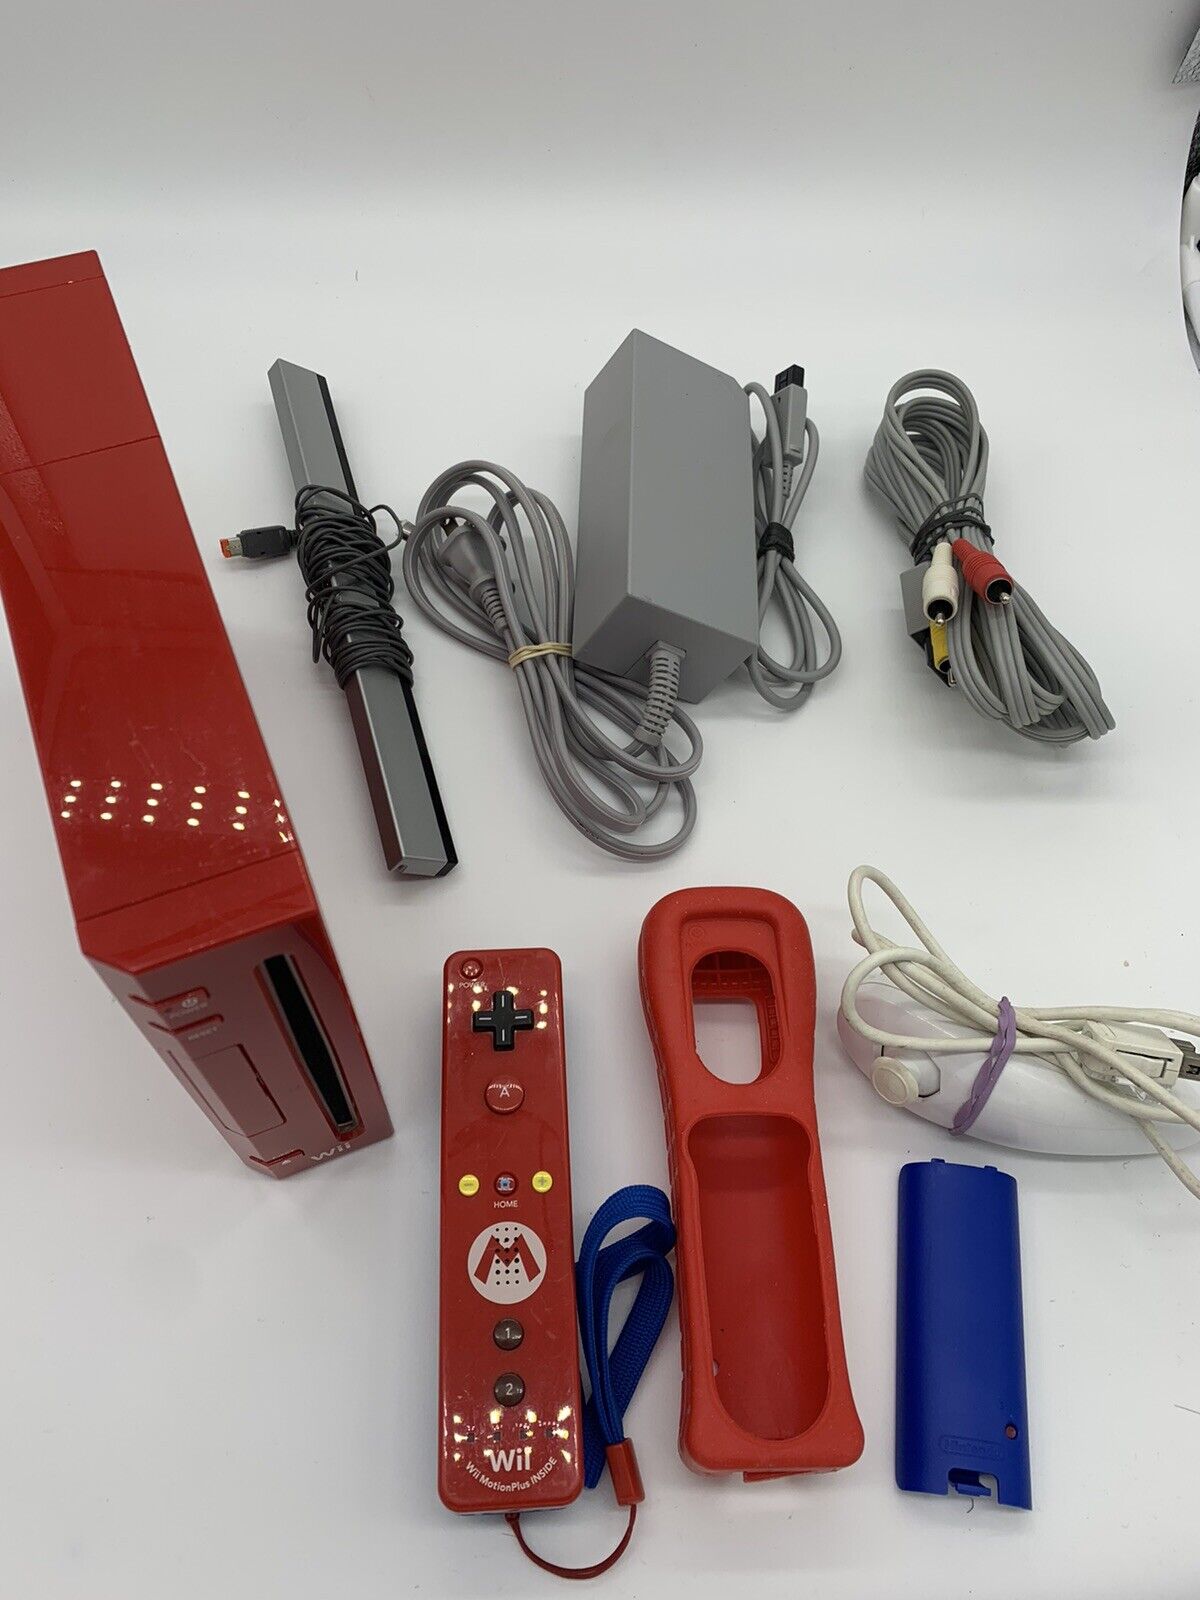 Nintendo RVL001 Wii Red Console With Mario Remote - Tested